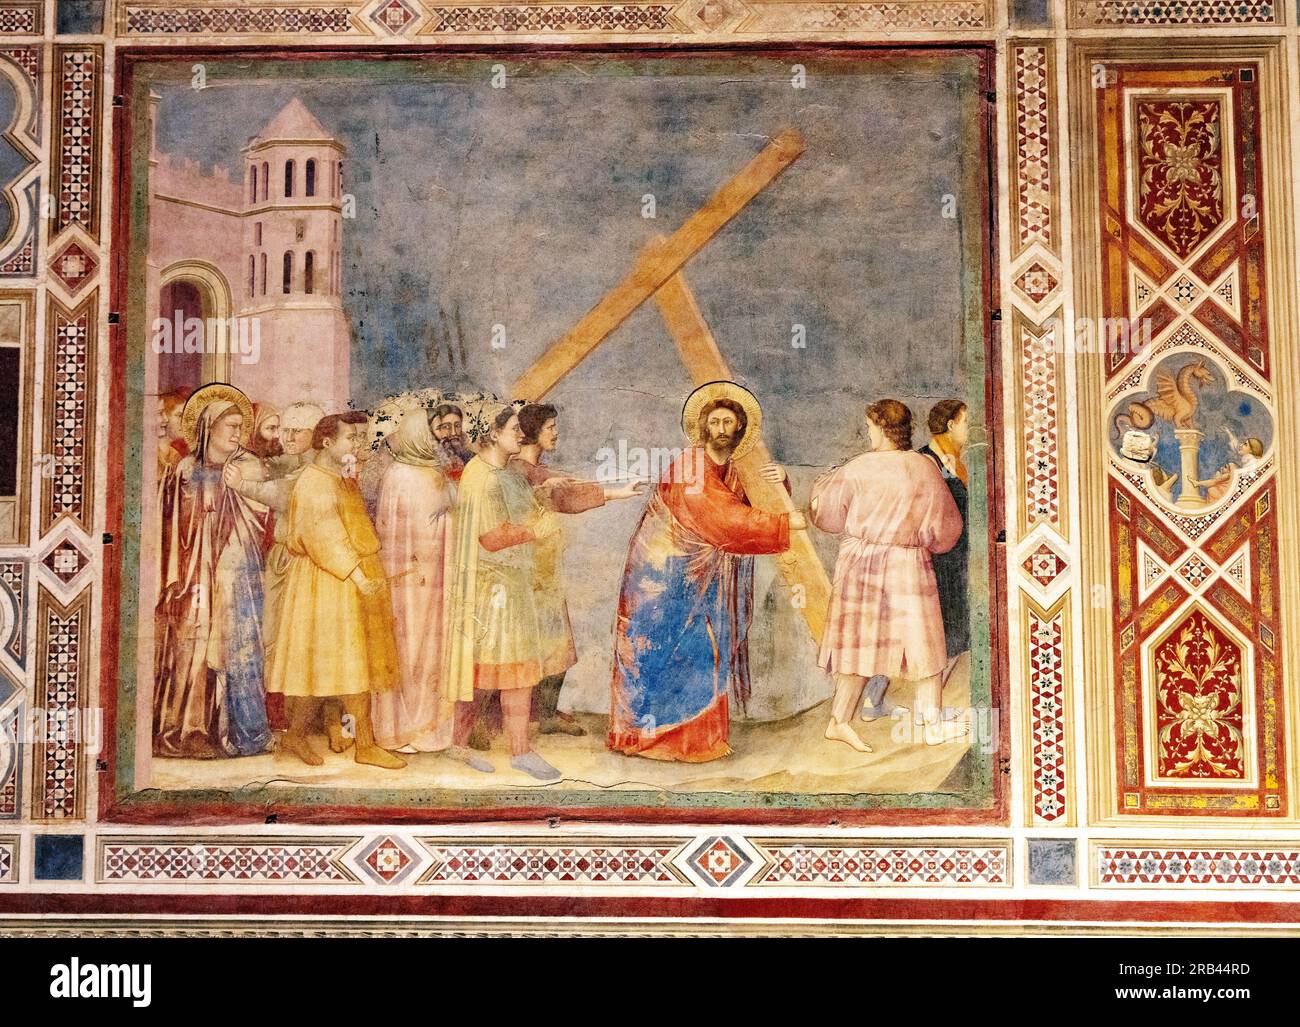 Giotto fresco, the Scrovegni Chapel, Padua Italy - 1300s Italian Renaissance paintings of the Life of Christ; here Carrying the Cross. Art history Stock Photo